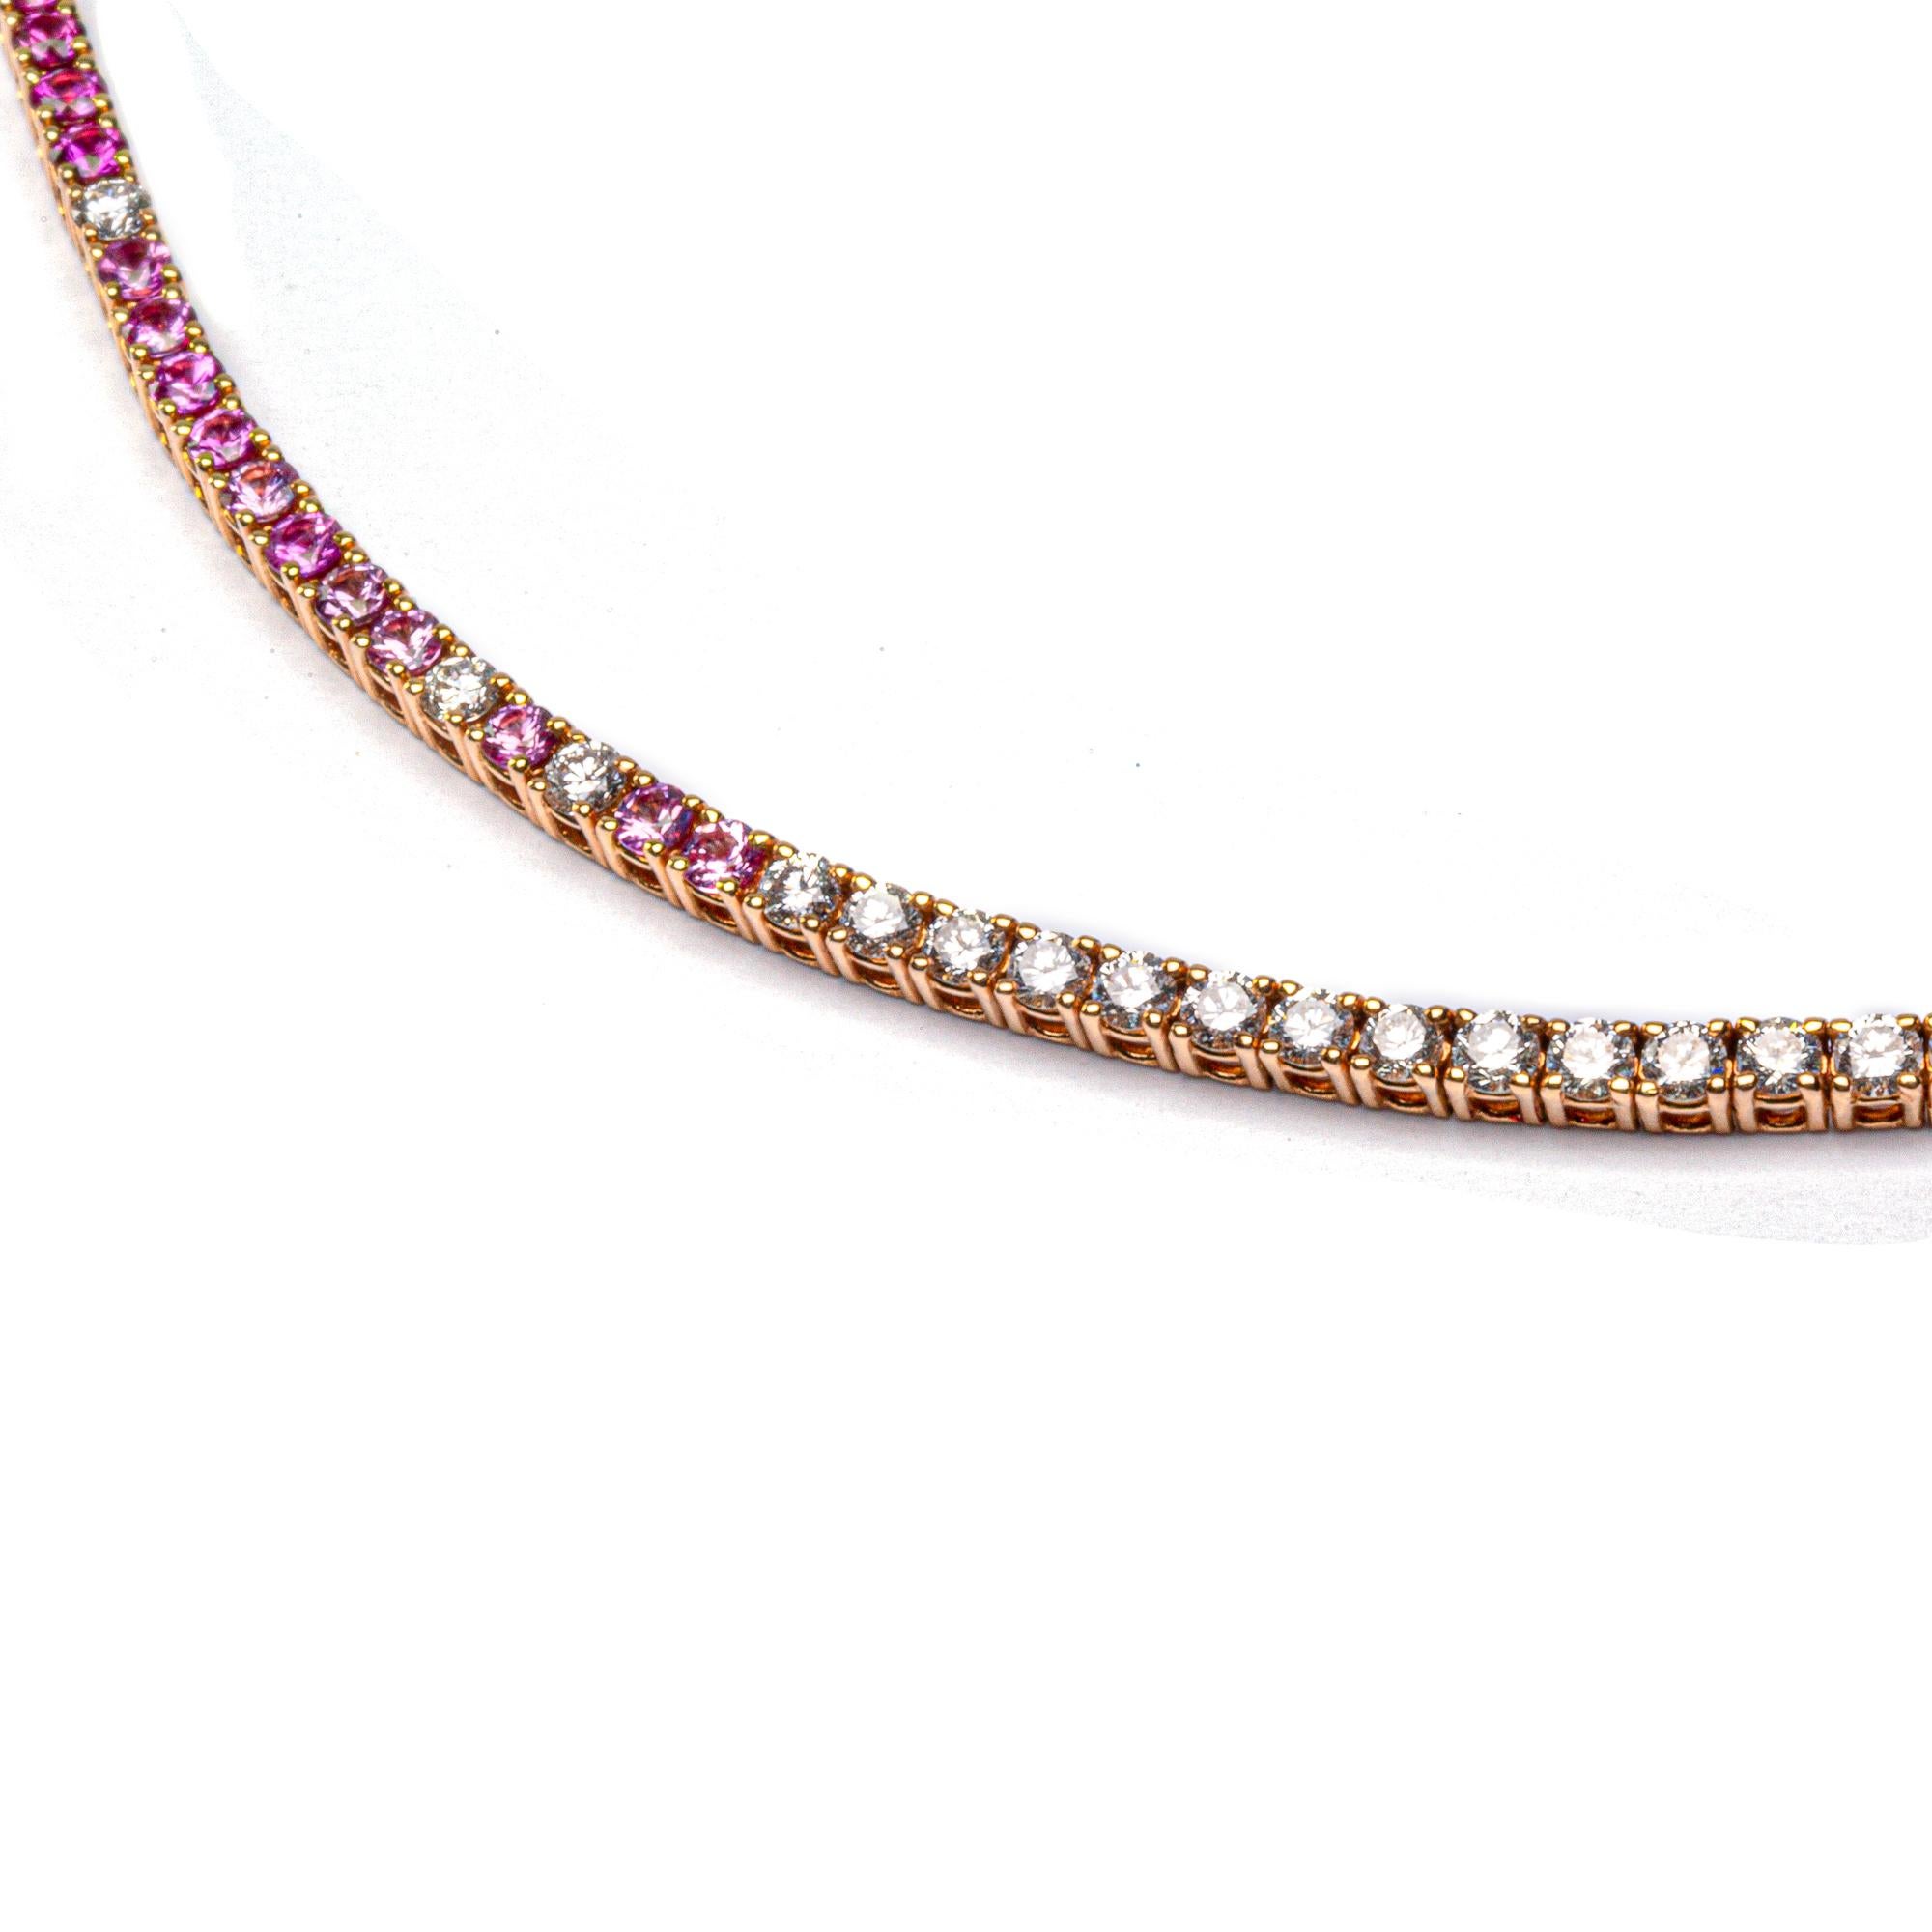 Alex Jona design collection, hand crafted in Italy, 18 karats rose gold tennis bracelet (7